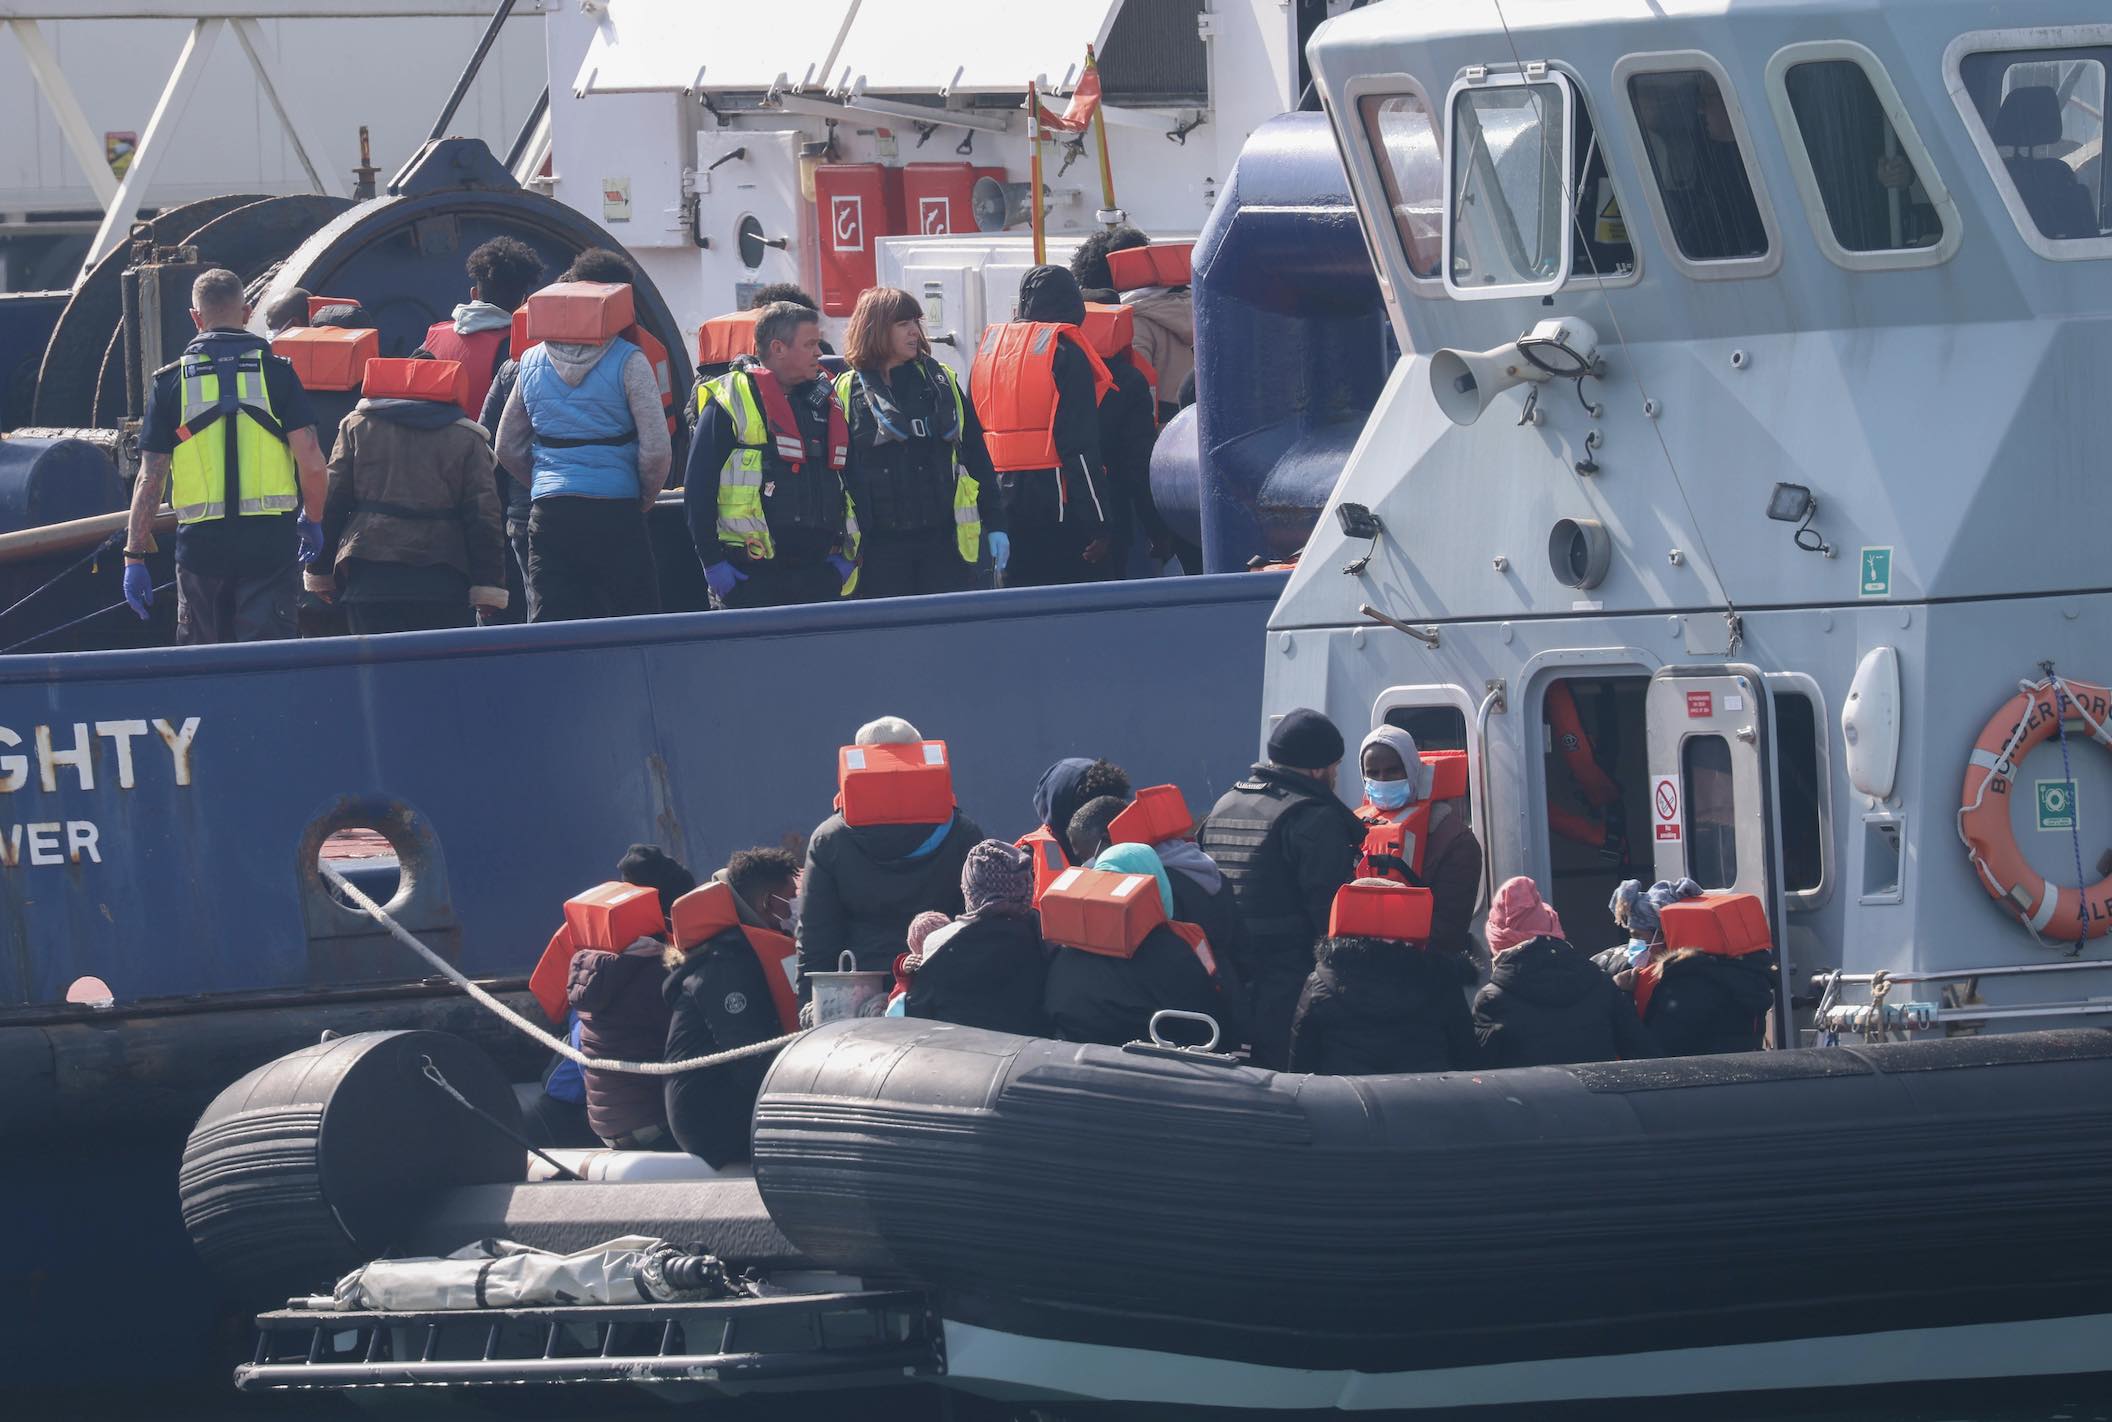 Over 300 migrants were brought into Dover today as the calm weather has allowed the Channel crossings to resume